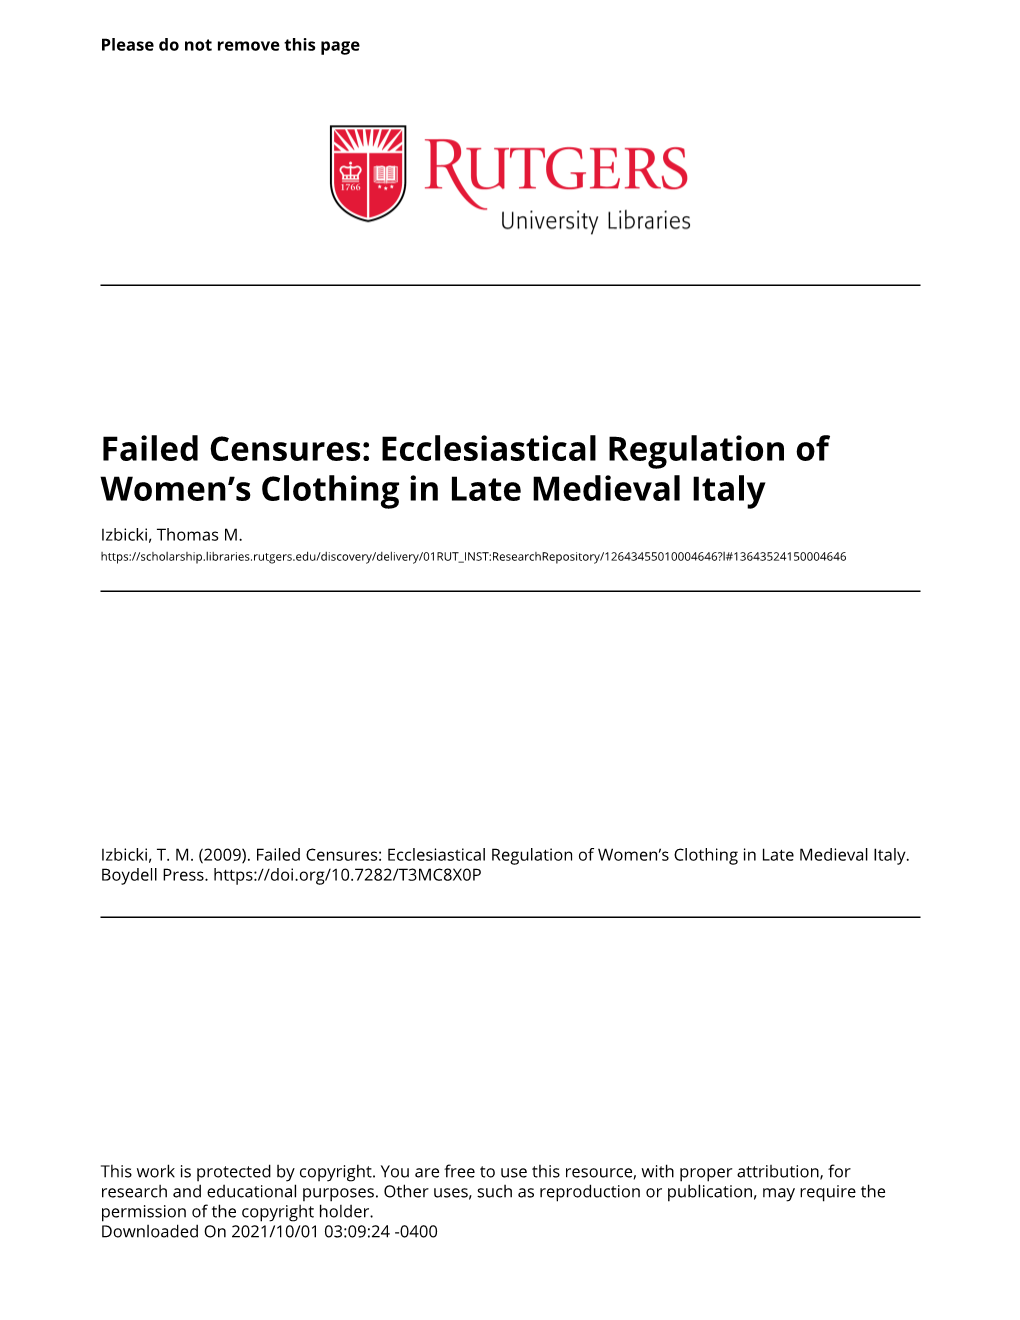 Ecclesiastical Regulation of Women's Clothing in Late Medieval Italy